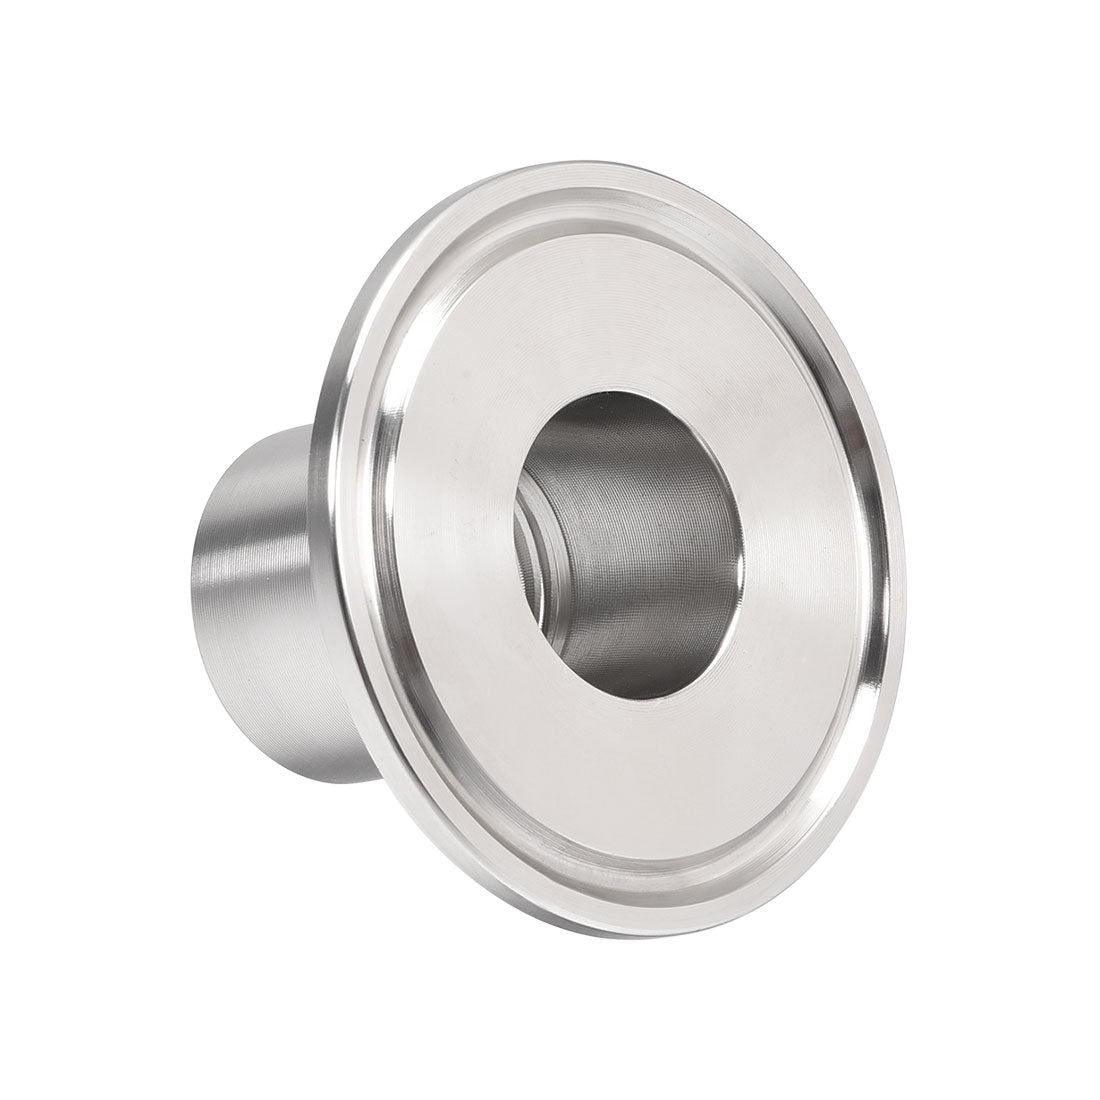 uxcell Uxcell 1/2 G Female Threaded Pipe Fitting to Clamp OD 50.5mm Ferrule